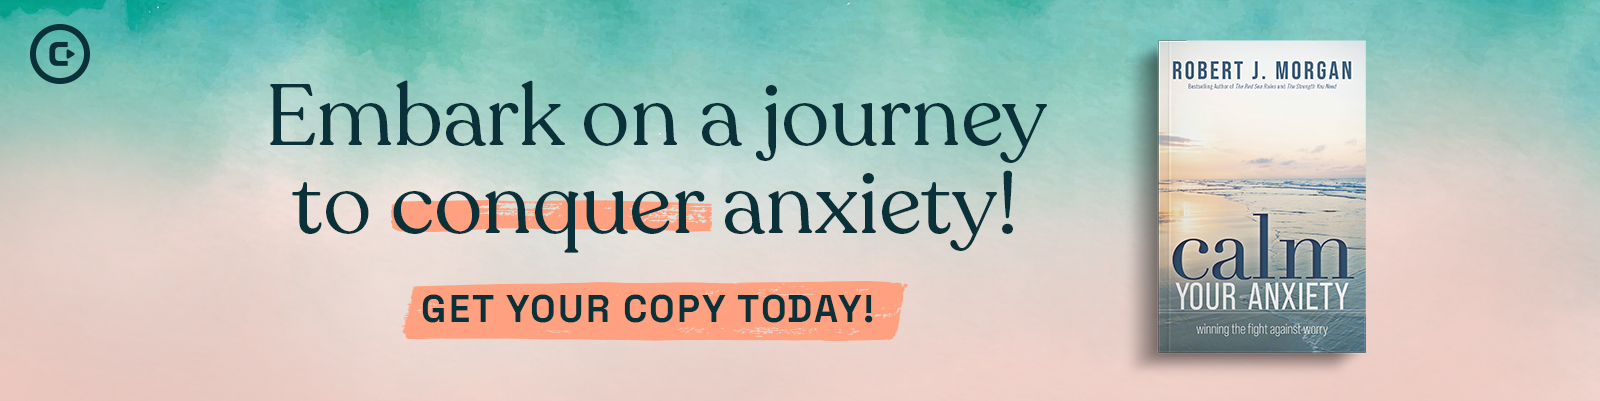 Embark on a journey to conquer anxiety.